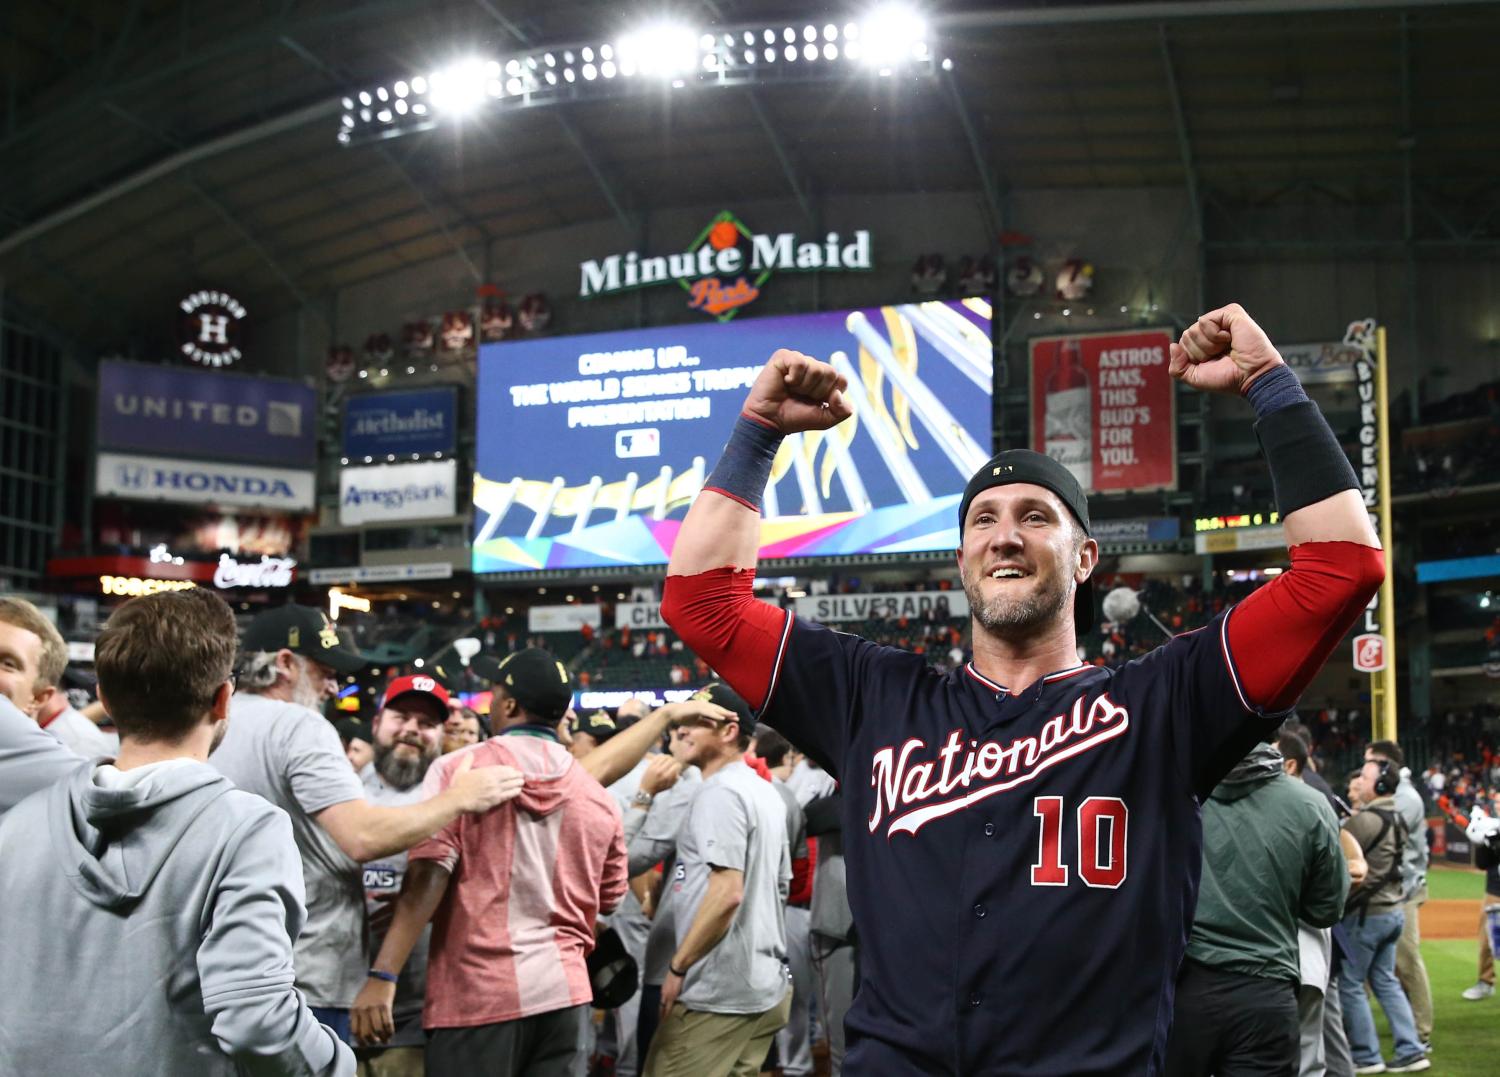 Oct 30, 2019; Houston, TX, USA; Washington Nationals catcher Yan Gomes (10) celebrates after defeating the Houston Astros in game seven of the 2019 World Series at Minute Maid Park. The Washington Nationals won the World Series winning four games to three.  Mandatory Credit: Troy Taormina-USA TODAY Sports - 13596382